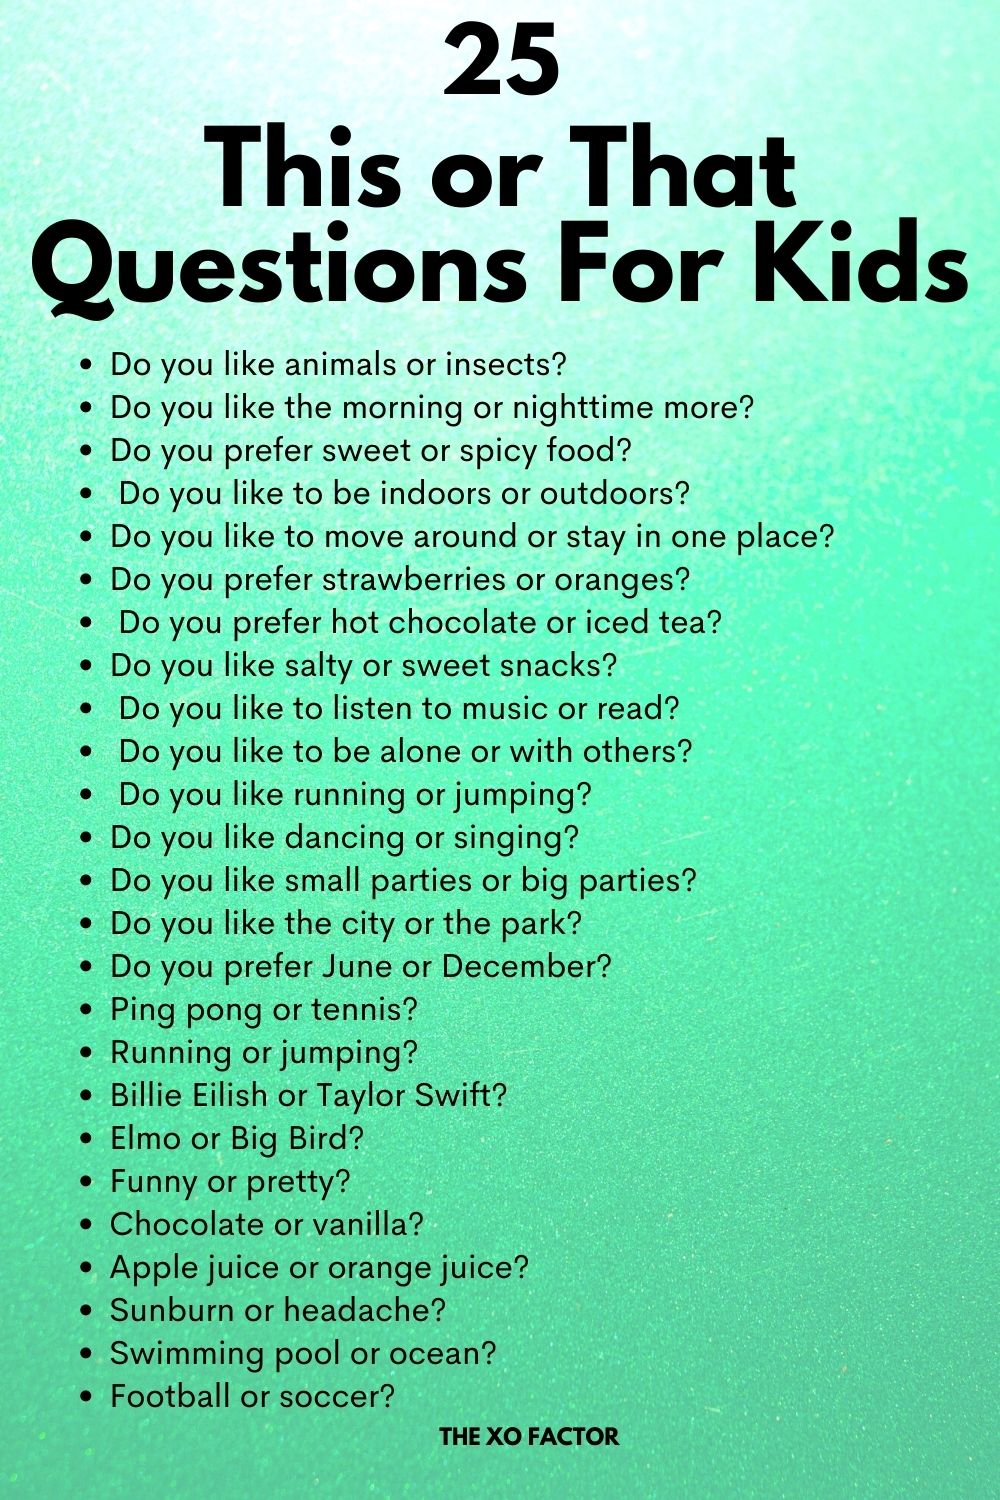 This or That Questions For Kids